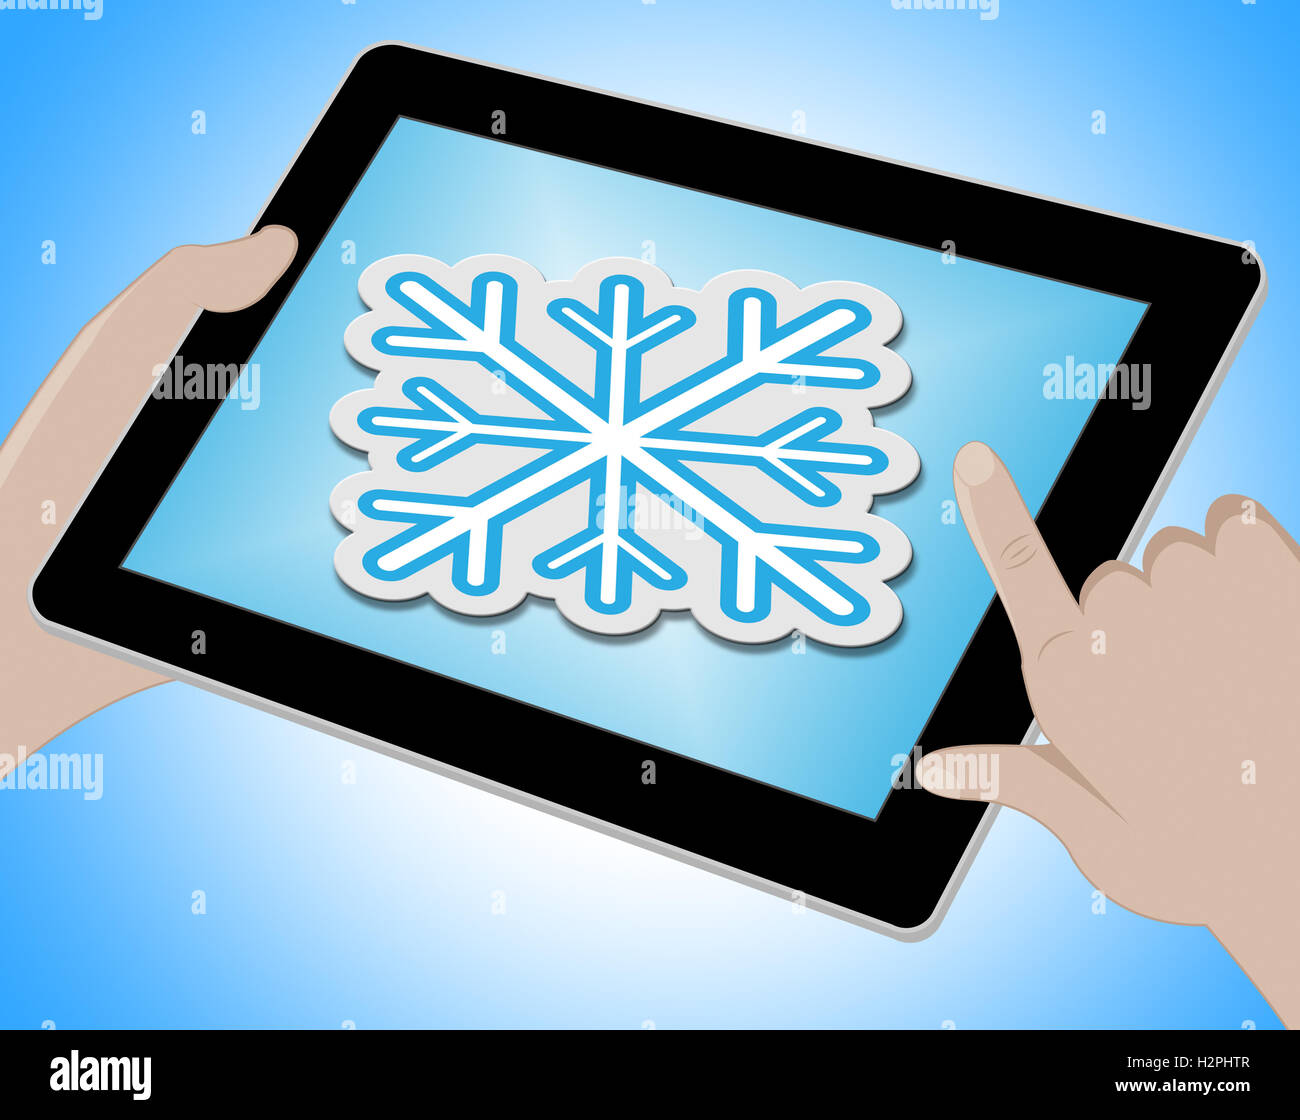 Snow Forecast Online Meaning Bad Weather 3d Illustration Stock Photo